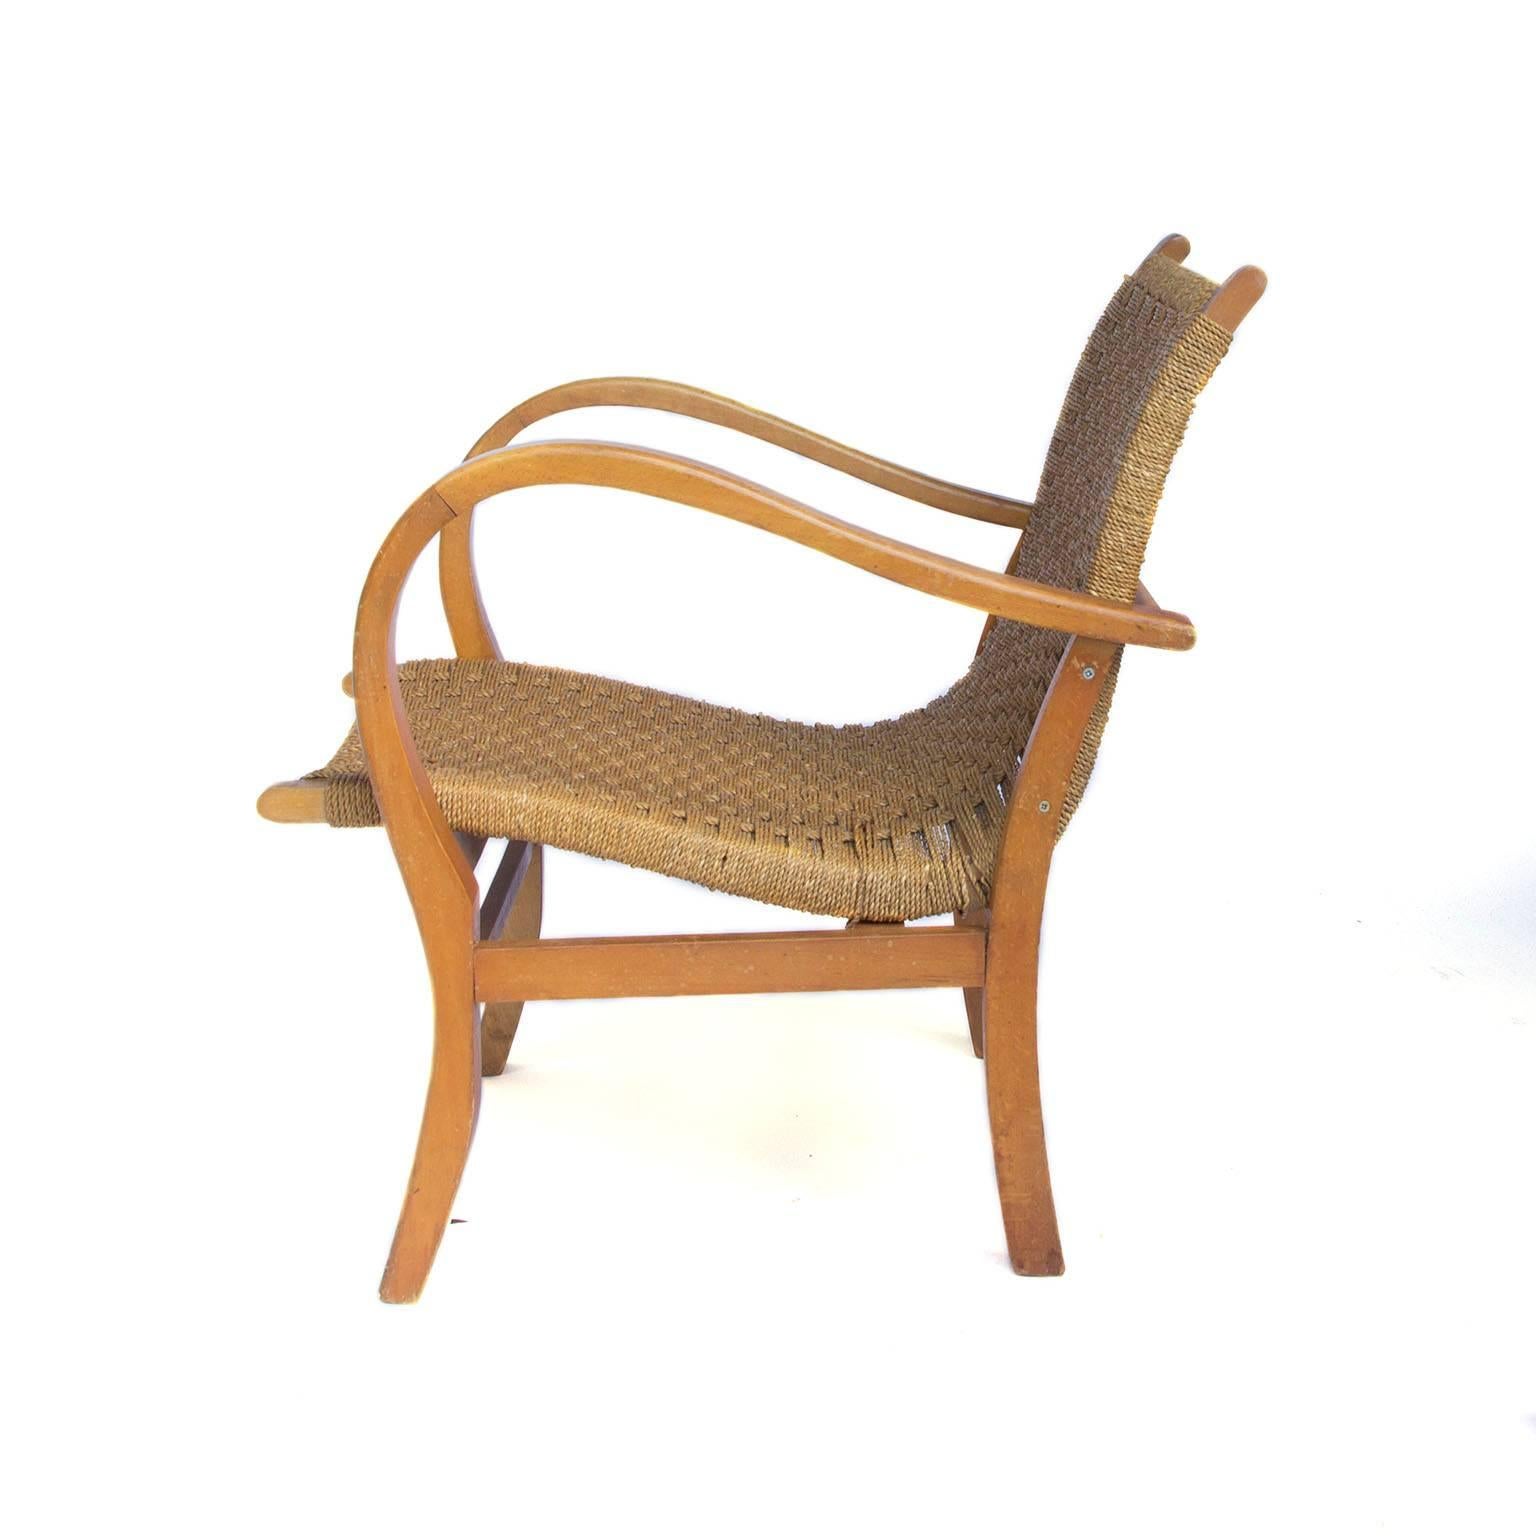 Rare, in those days limited edition very comfortable nice easy chair in rope and wood for the recent bankrupt Dutch Giant Warehouse Company Vroom & Dreesman.

Free shipping for Amsterdam, Haarlem and IJmuiden for lamps, chairs, small items as tables